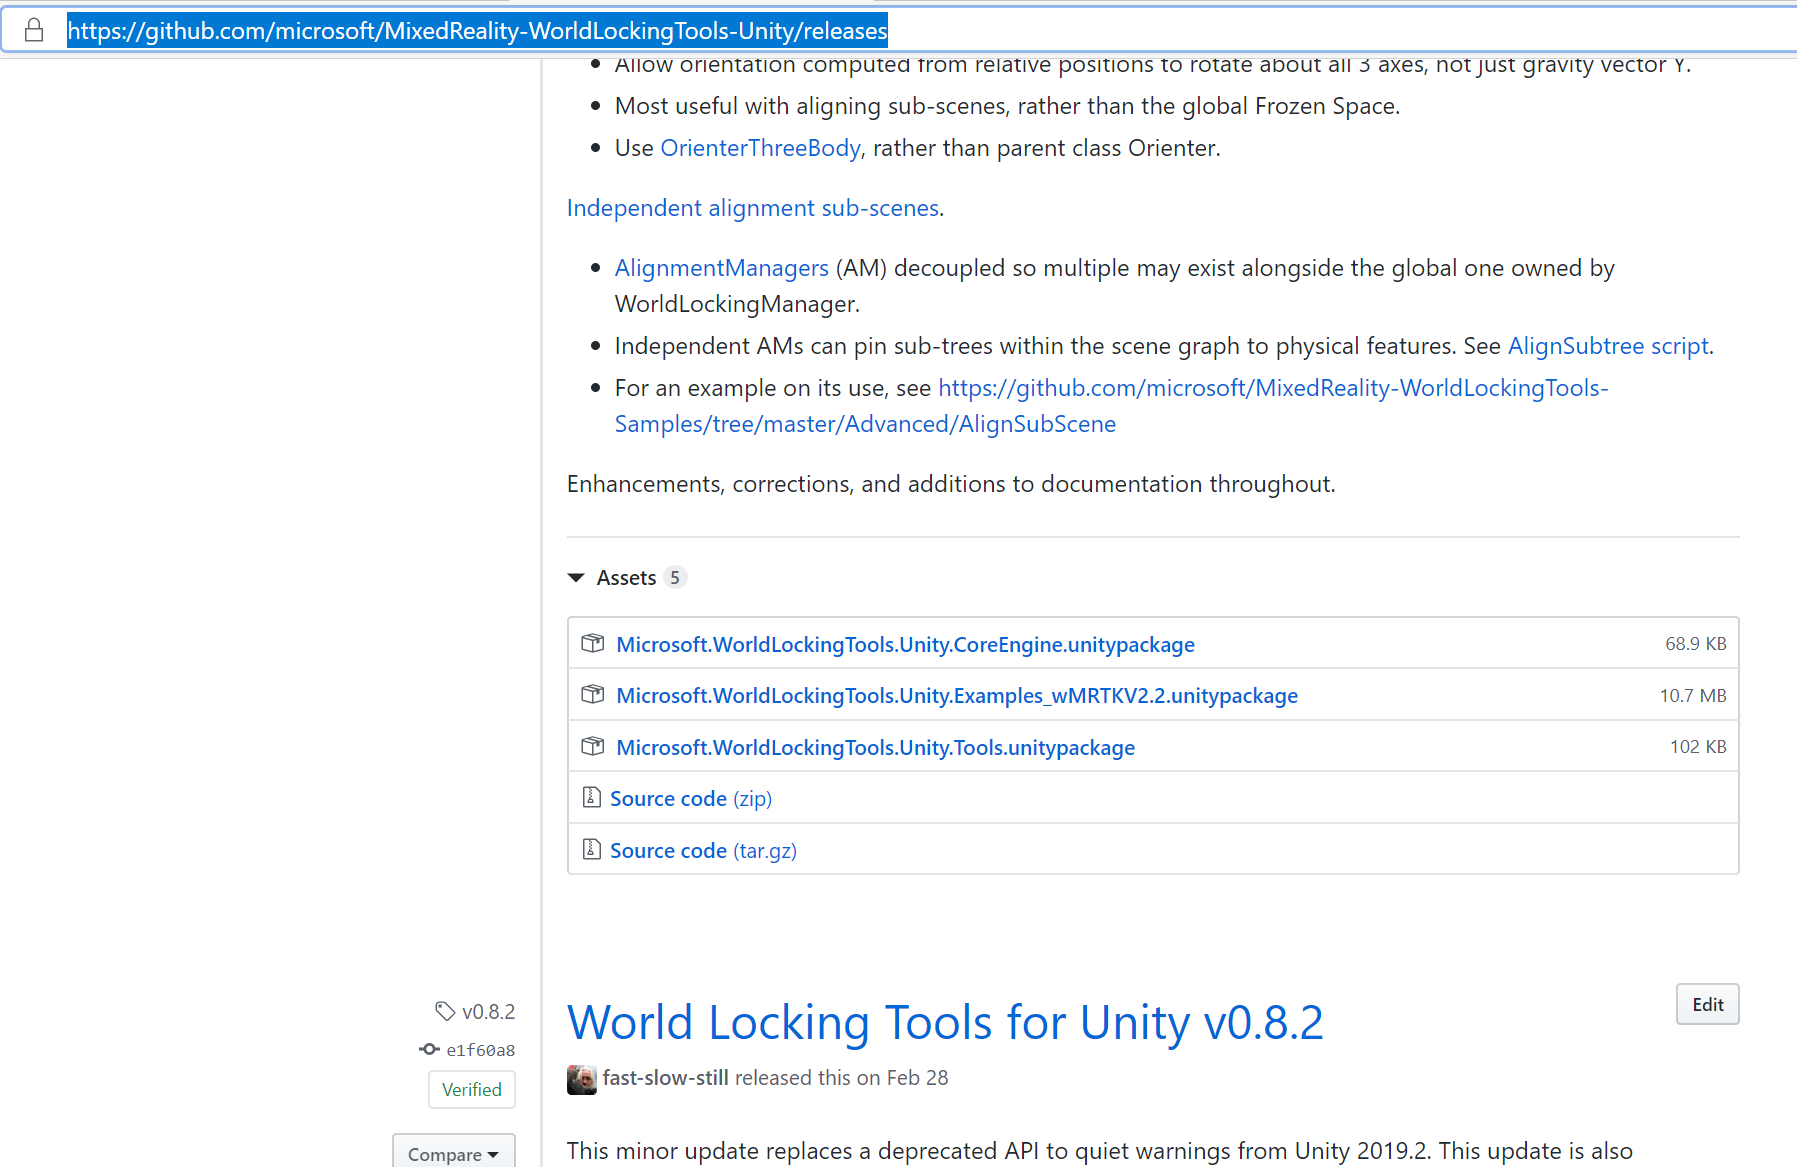 World Locking Tools releases page